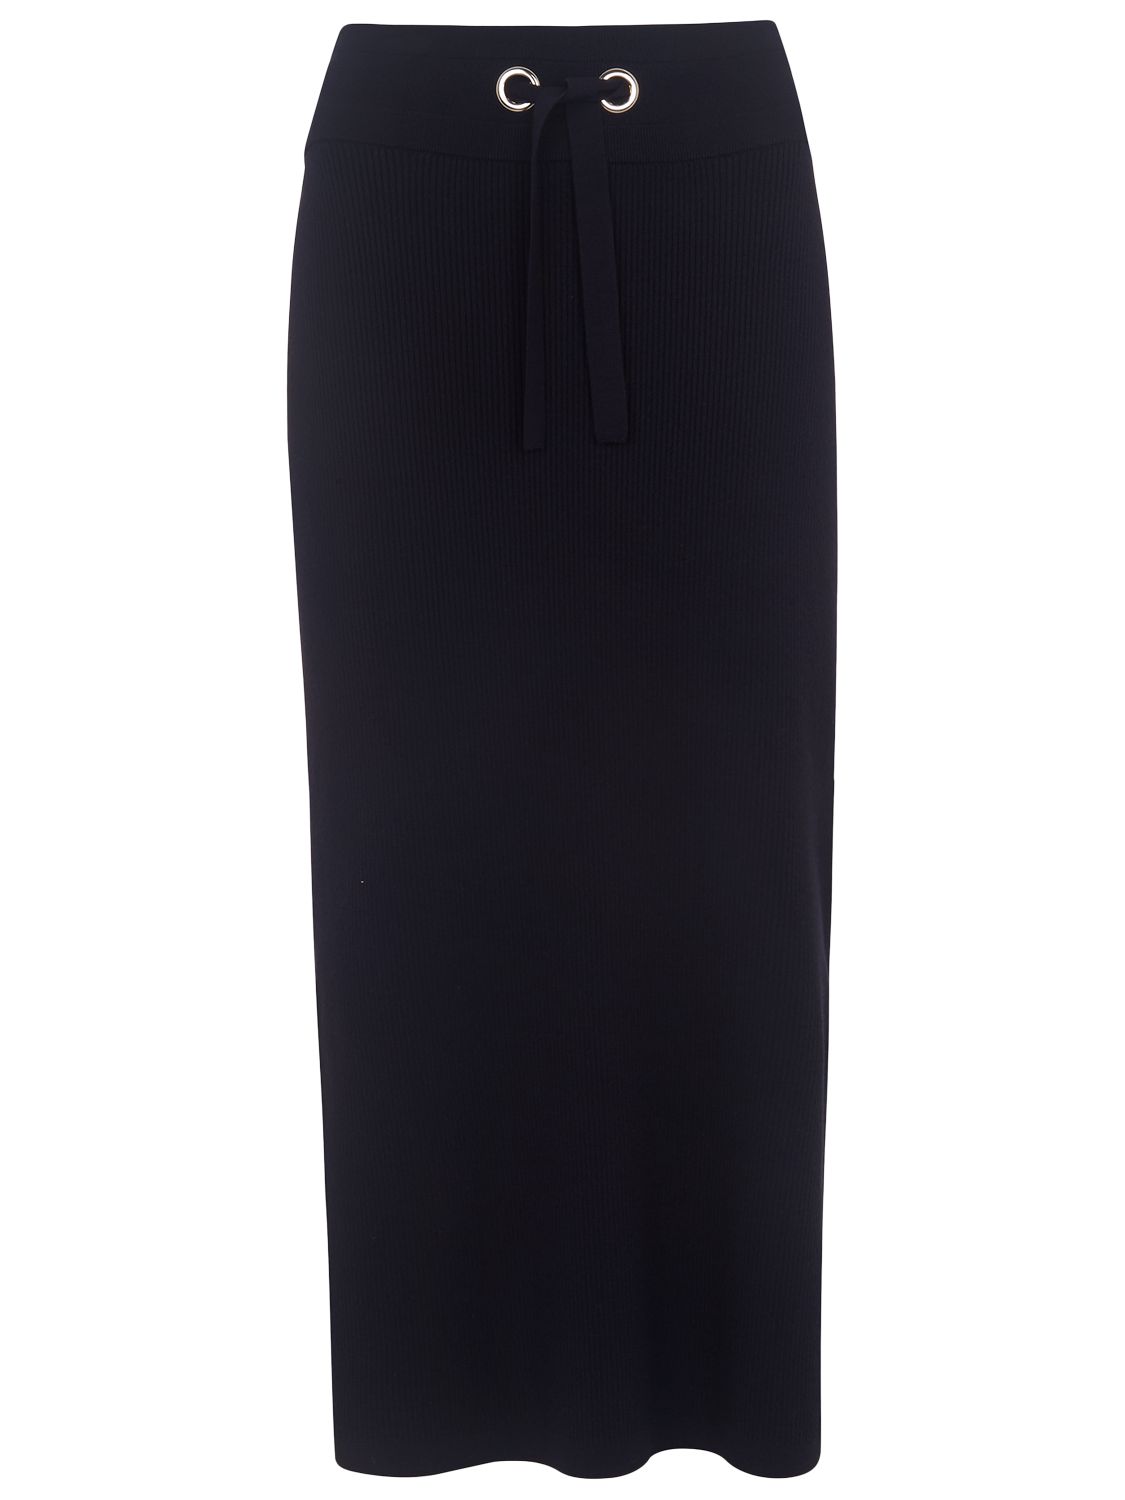 Whistles Tie Front Knitted Skirt, Navy